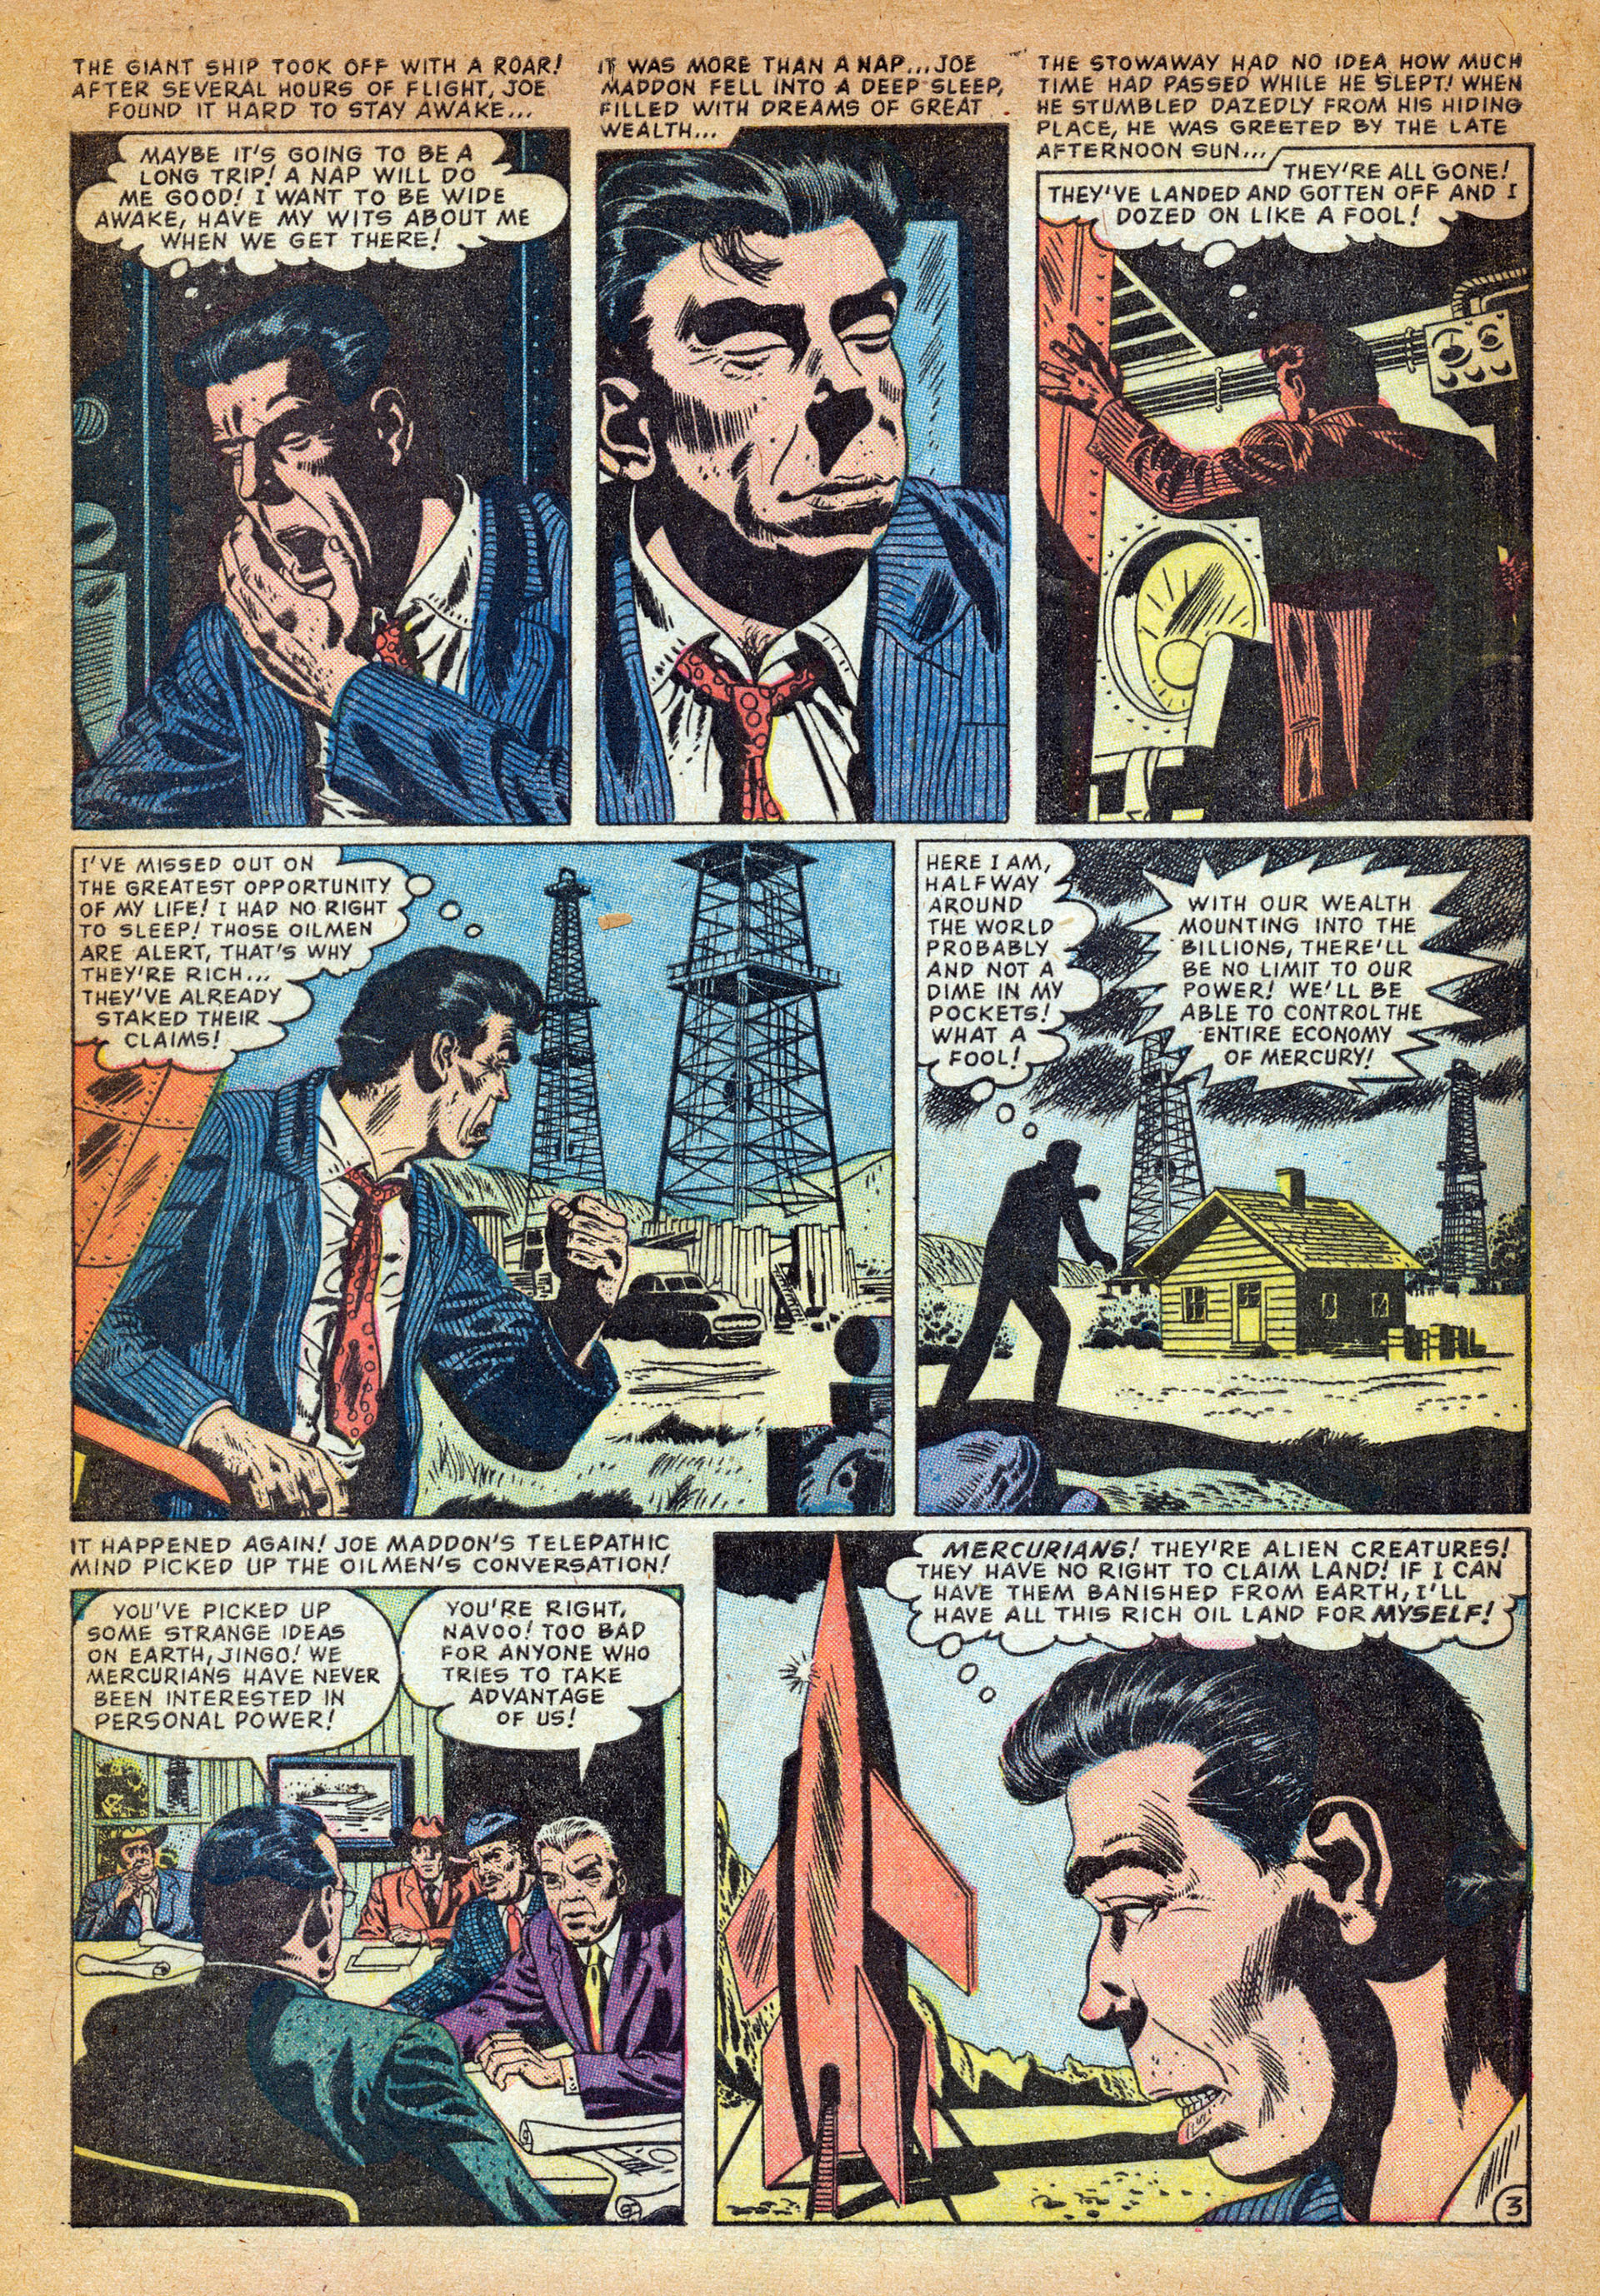 Marvel Tales (1949) 153 Page 4